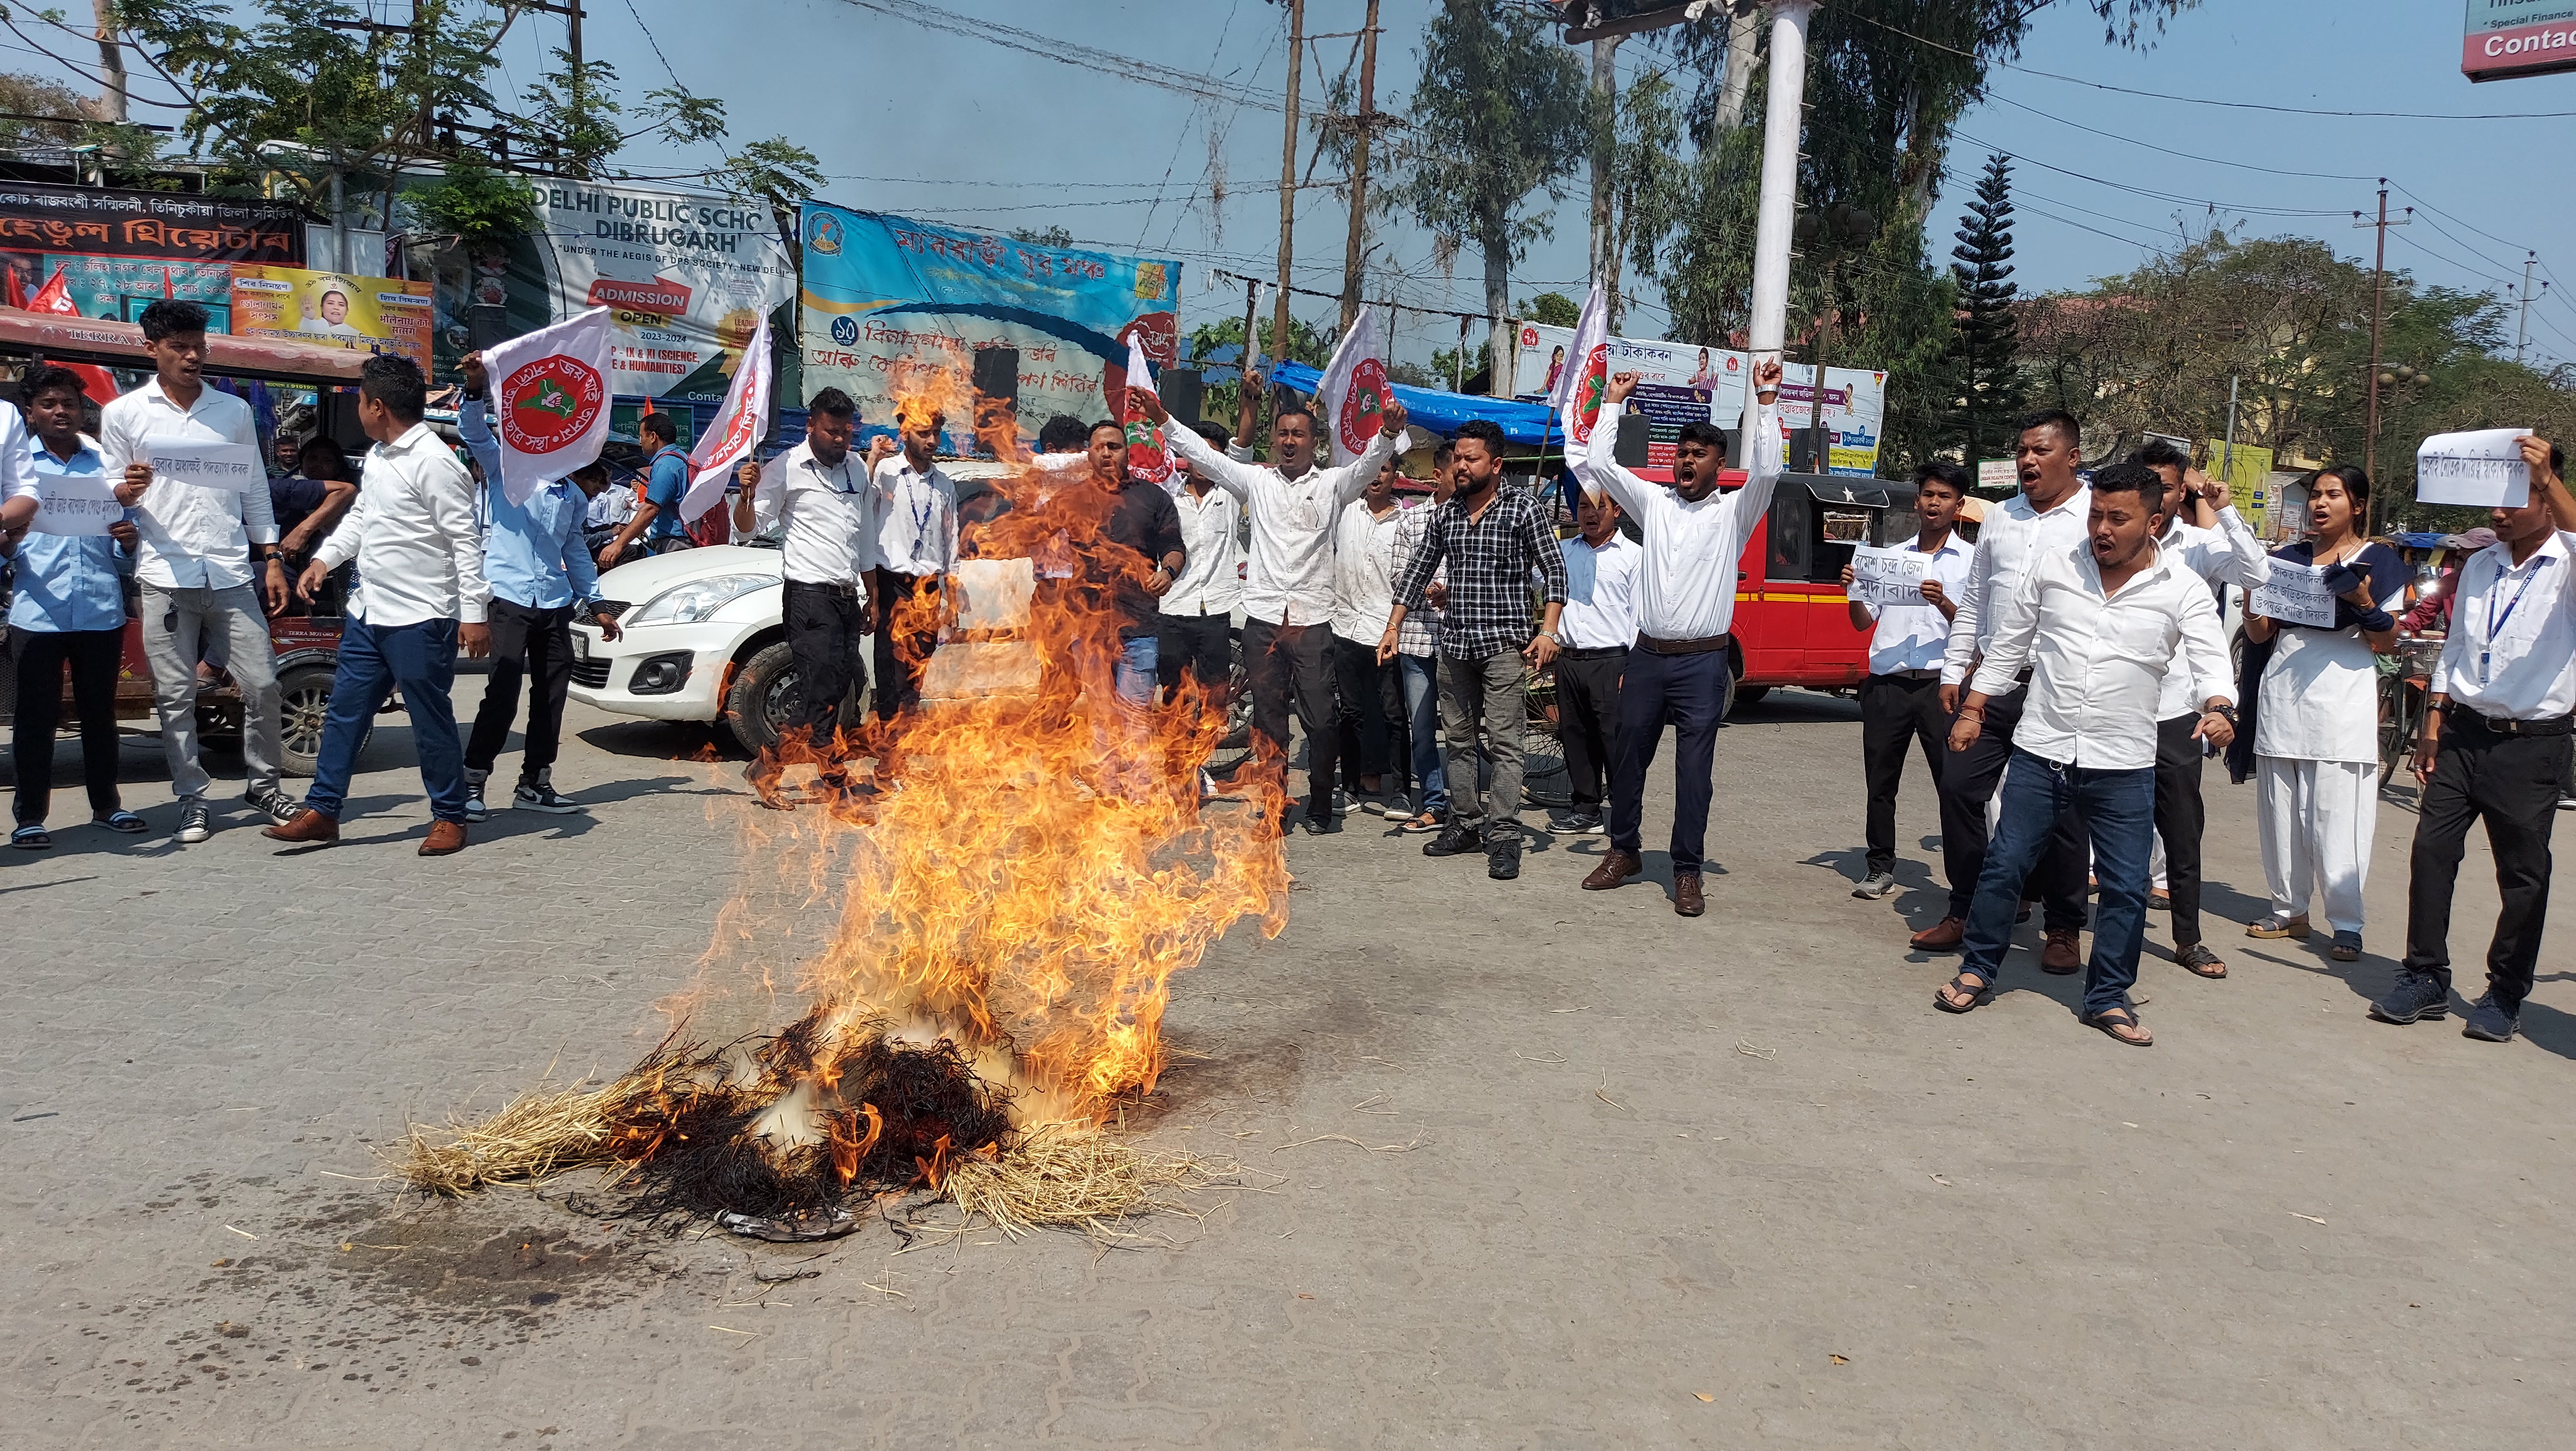 Protest against HSLC question paper leak All over Assam